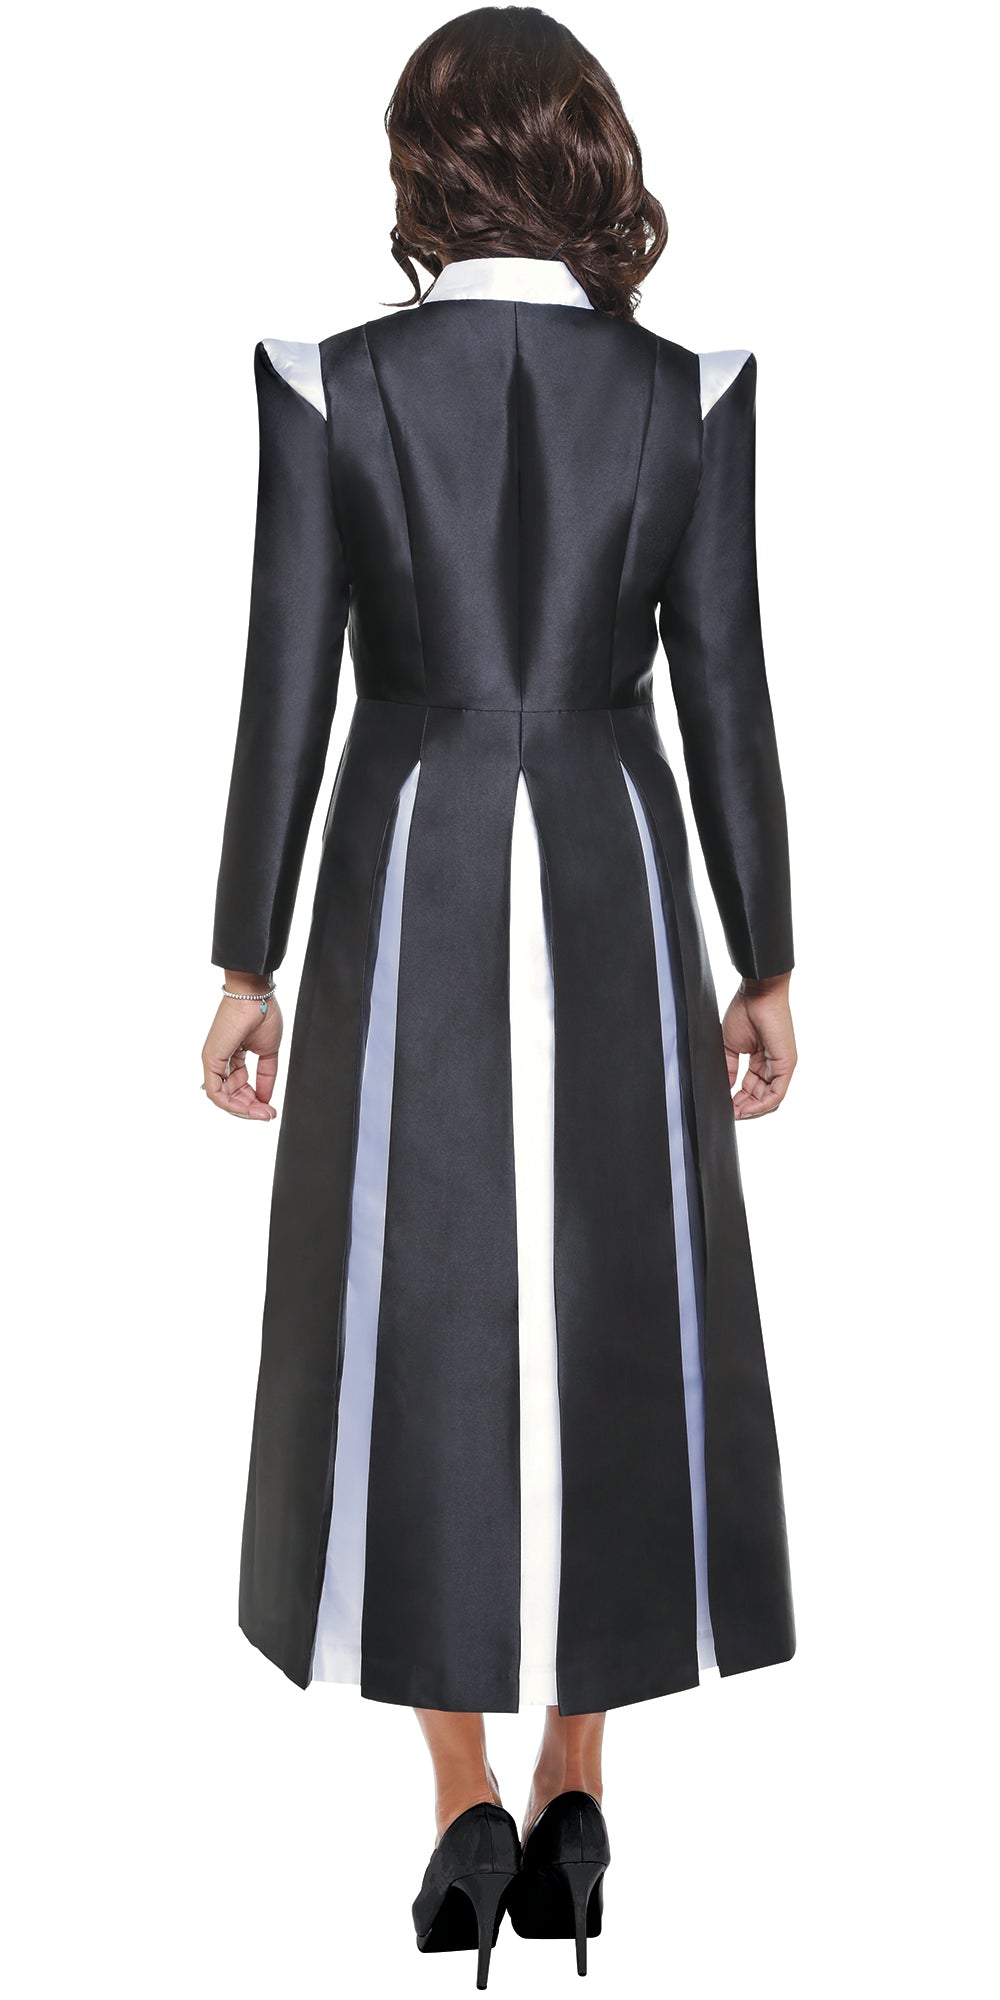 Regal Robes RR9131-Black White Church Robe With Contrast Pleats